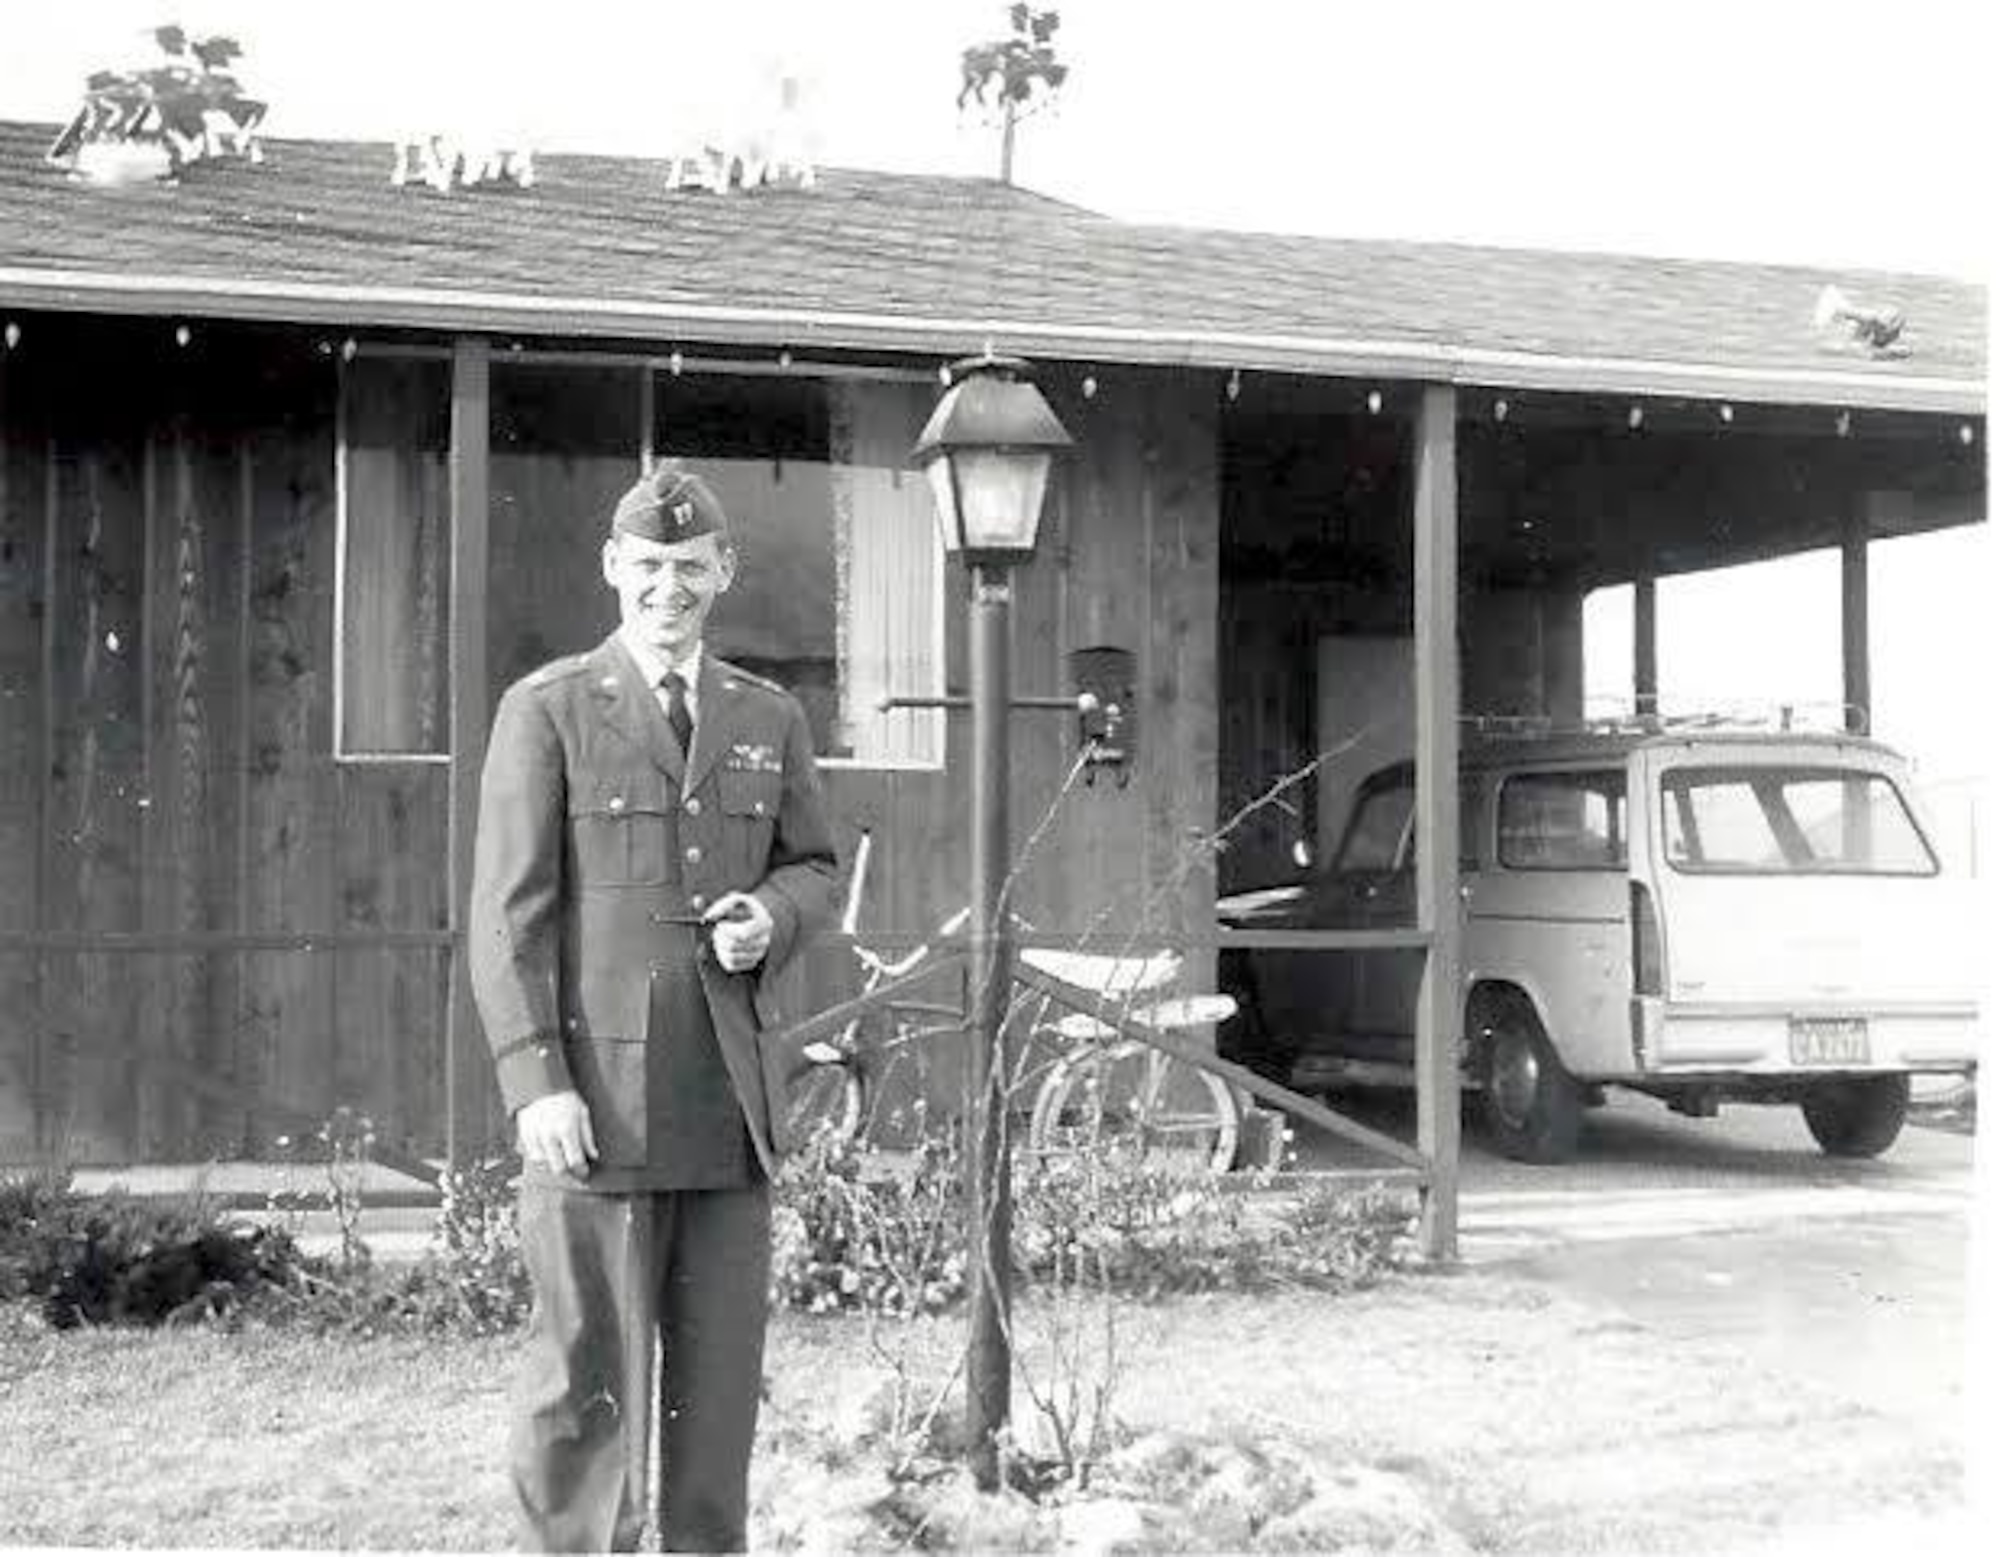 Col. Richard 'Dick' Kibbey poses for a photo in the early 1960's. Dick was a pilot in Vietnam when his helicopter was shot down and he was listed as missing in action for over 50 years before his remains were returned to the United States after being found by a local farmer. (Photo courtesy of Richard Kibbey)